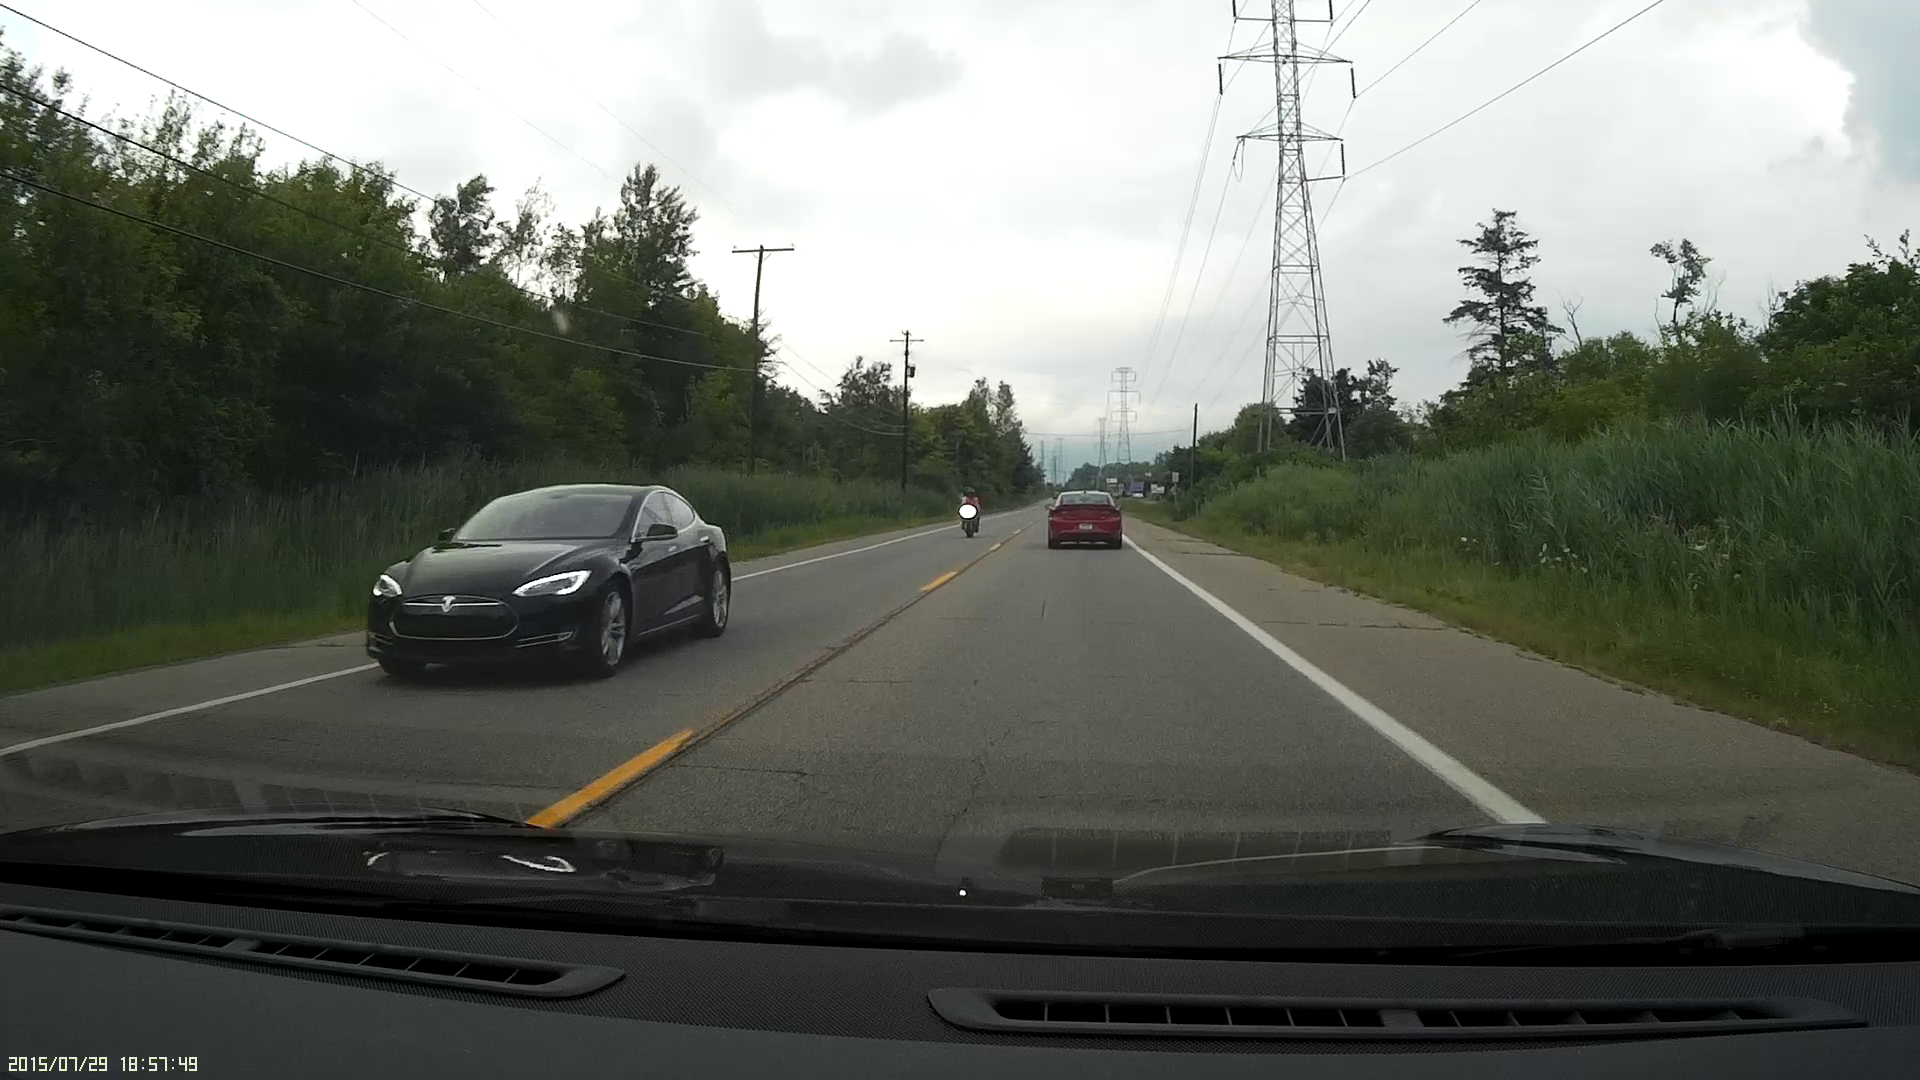 2015-07-29_model-s-sighting-43.png